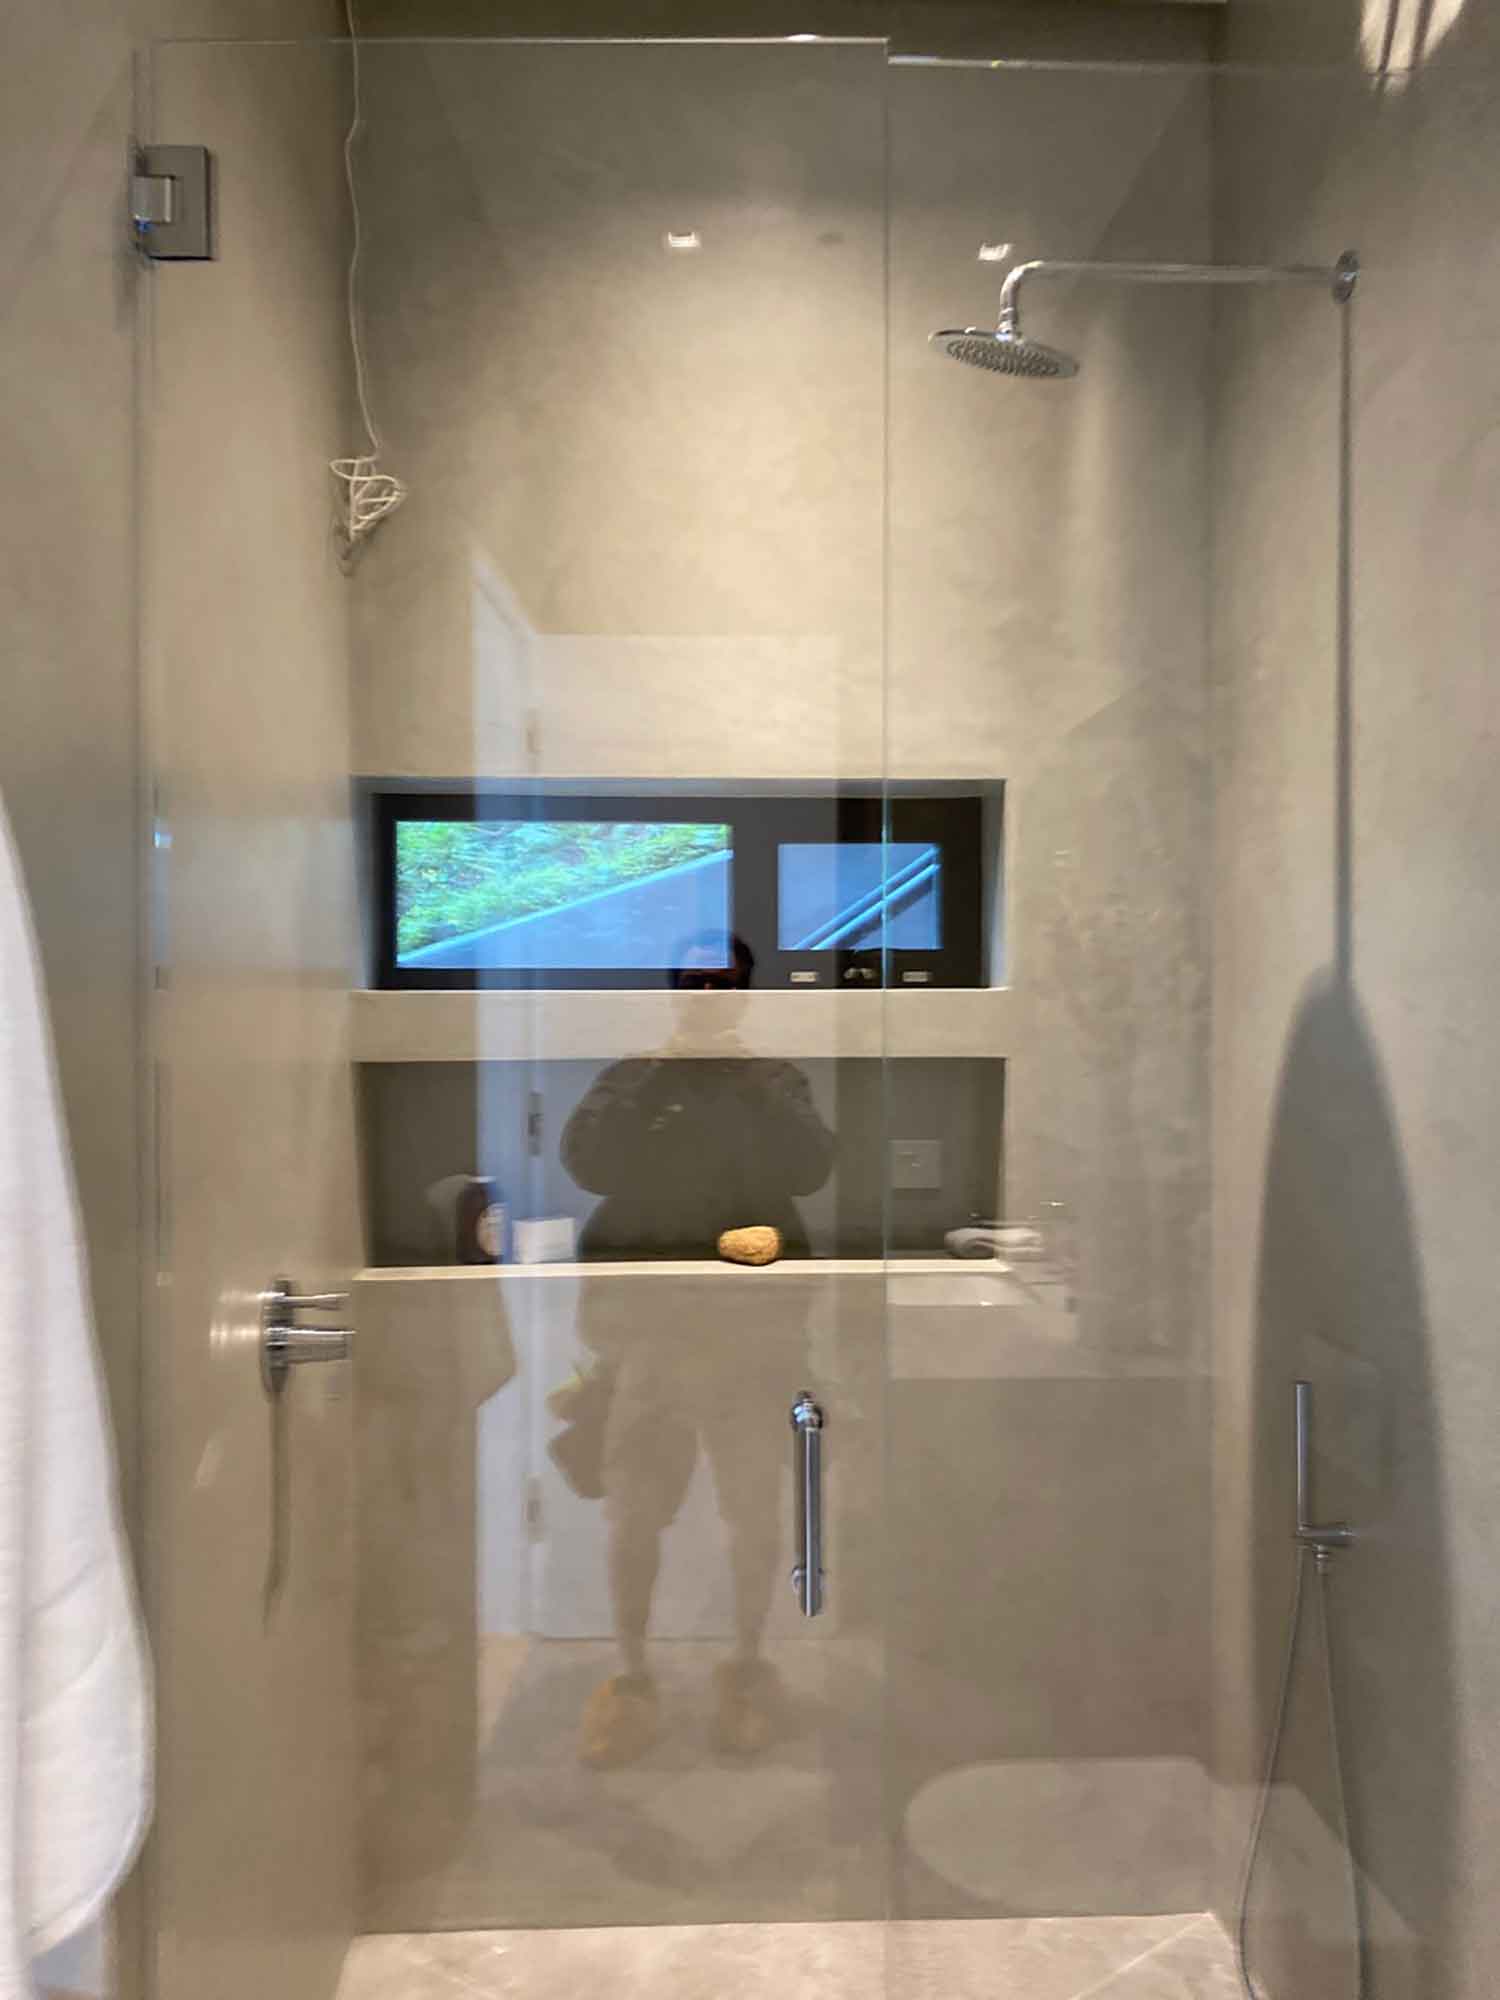 ClimatePro transformed this bathroom with 3M Night Vision Window Tint.